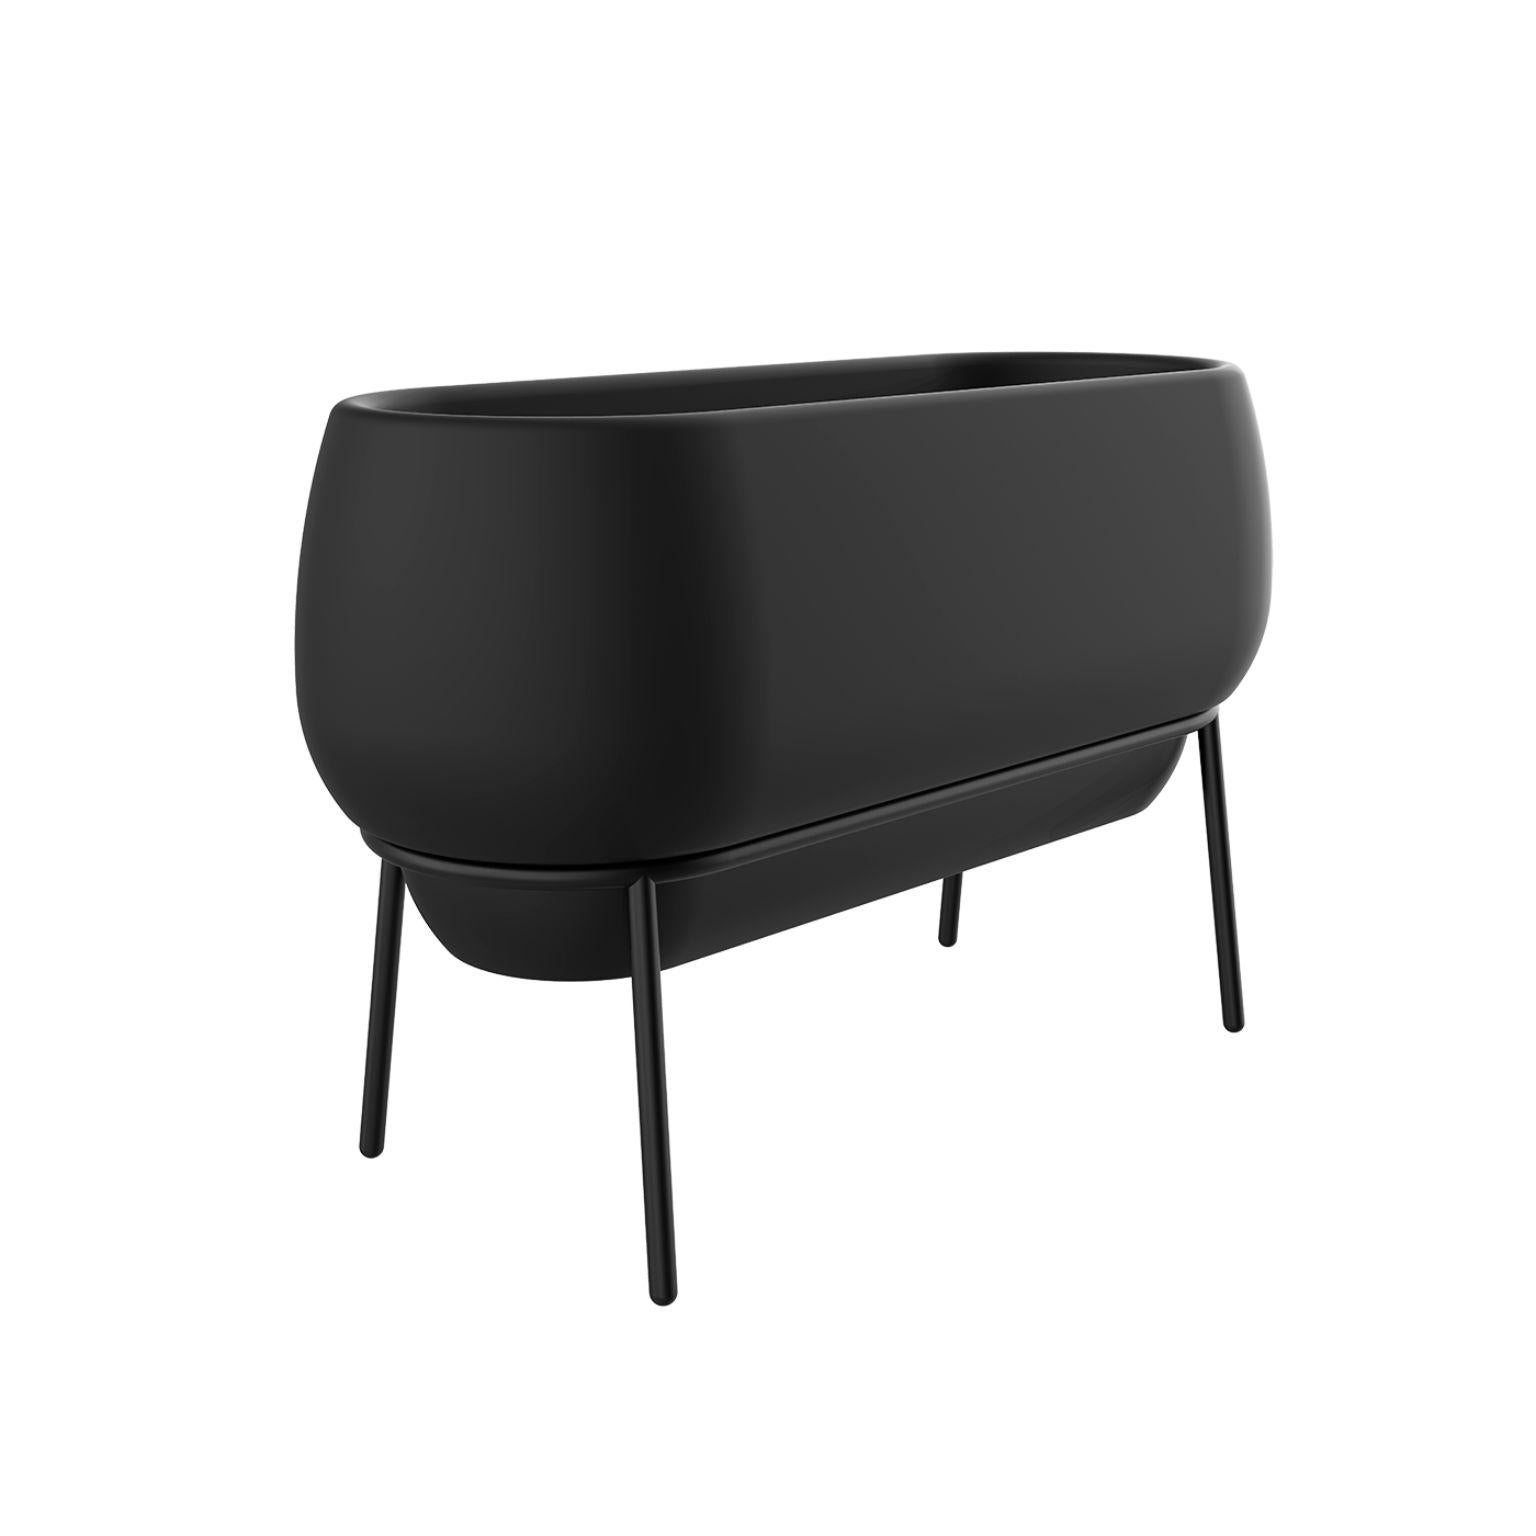 Lace black planter by MOWEE
Dimensions: D50 x W120 x H76 cm
Material: Polyethylene and stainless steel.
Weight: 13.5 kg.
Also available in different colors and finishes. (Lacquered or retroilluminated). 

Lace is a collection of furniture made